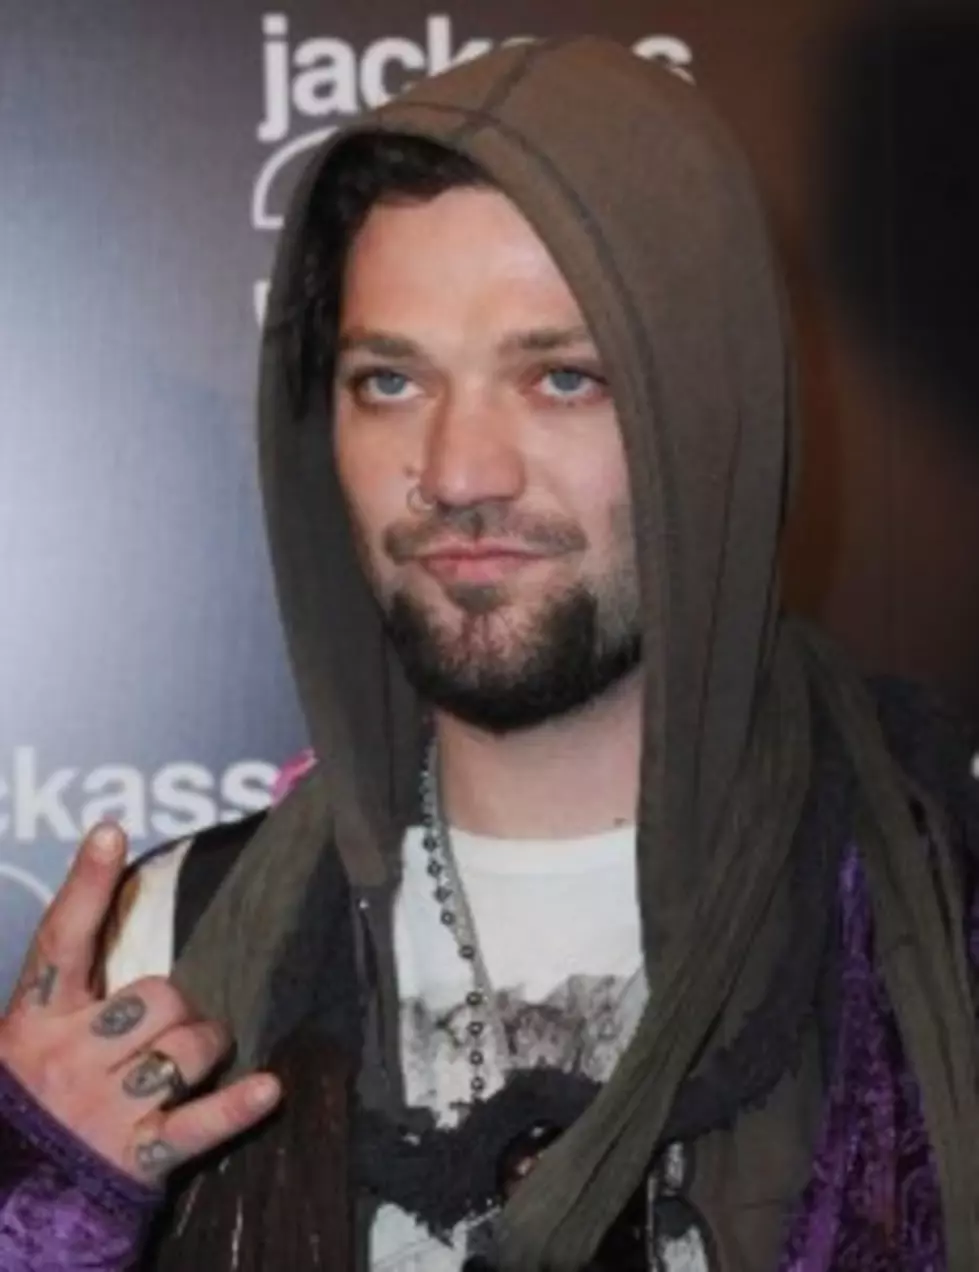 Bam Margera Gets Knocked Out After Insulting Woman